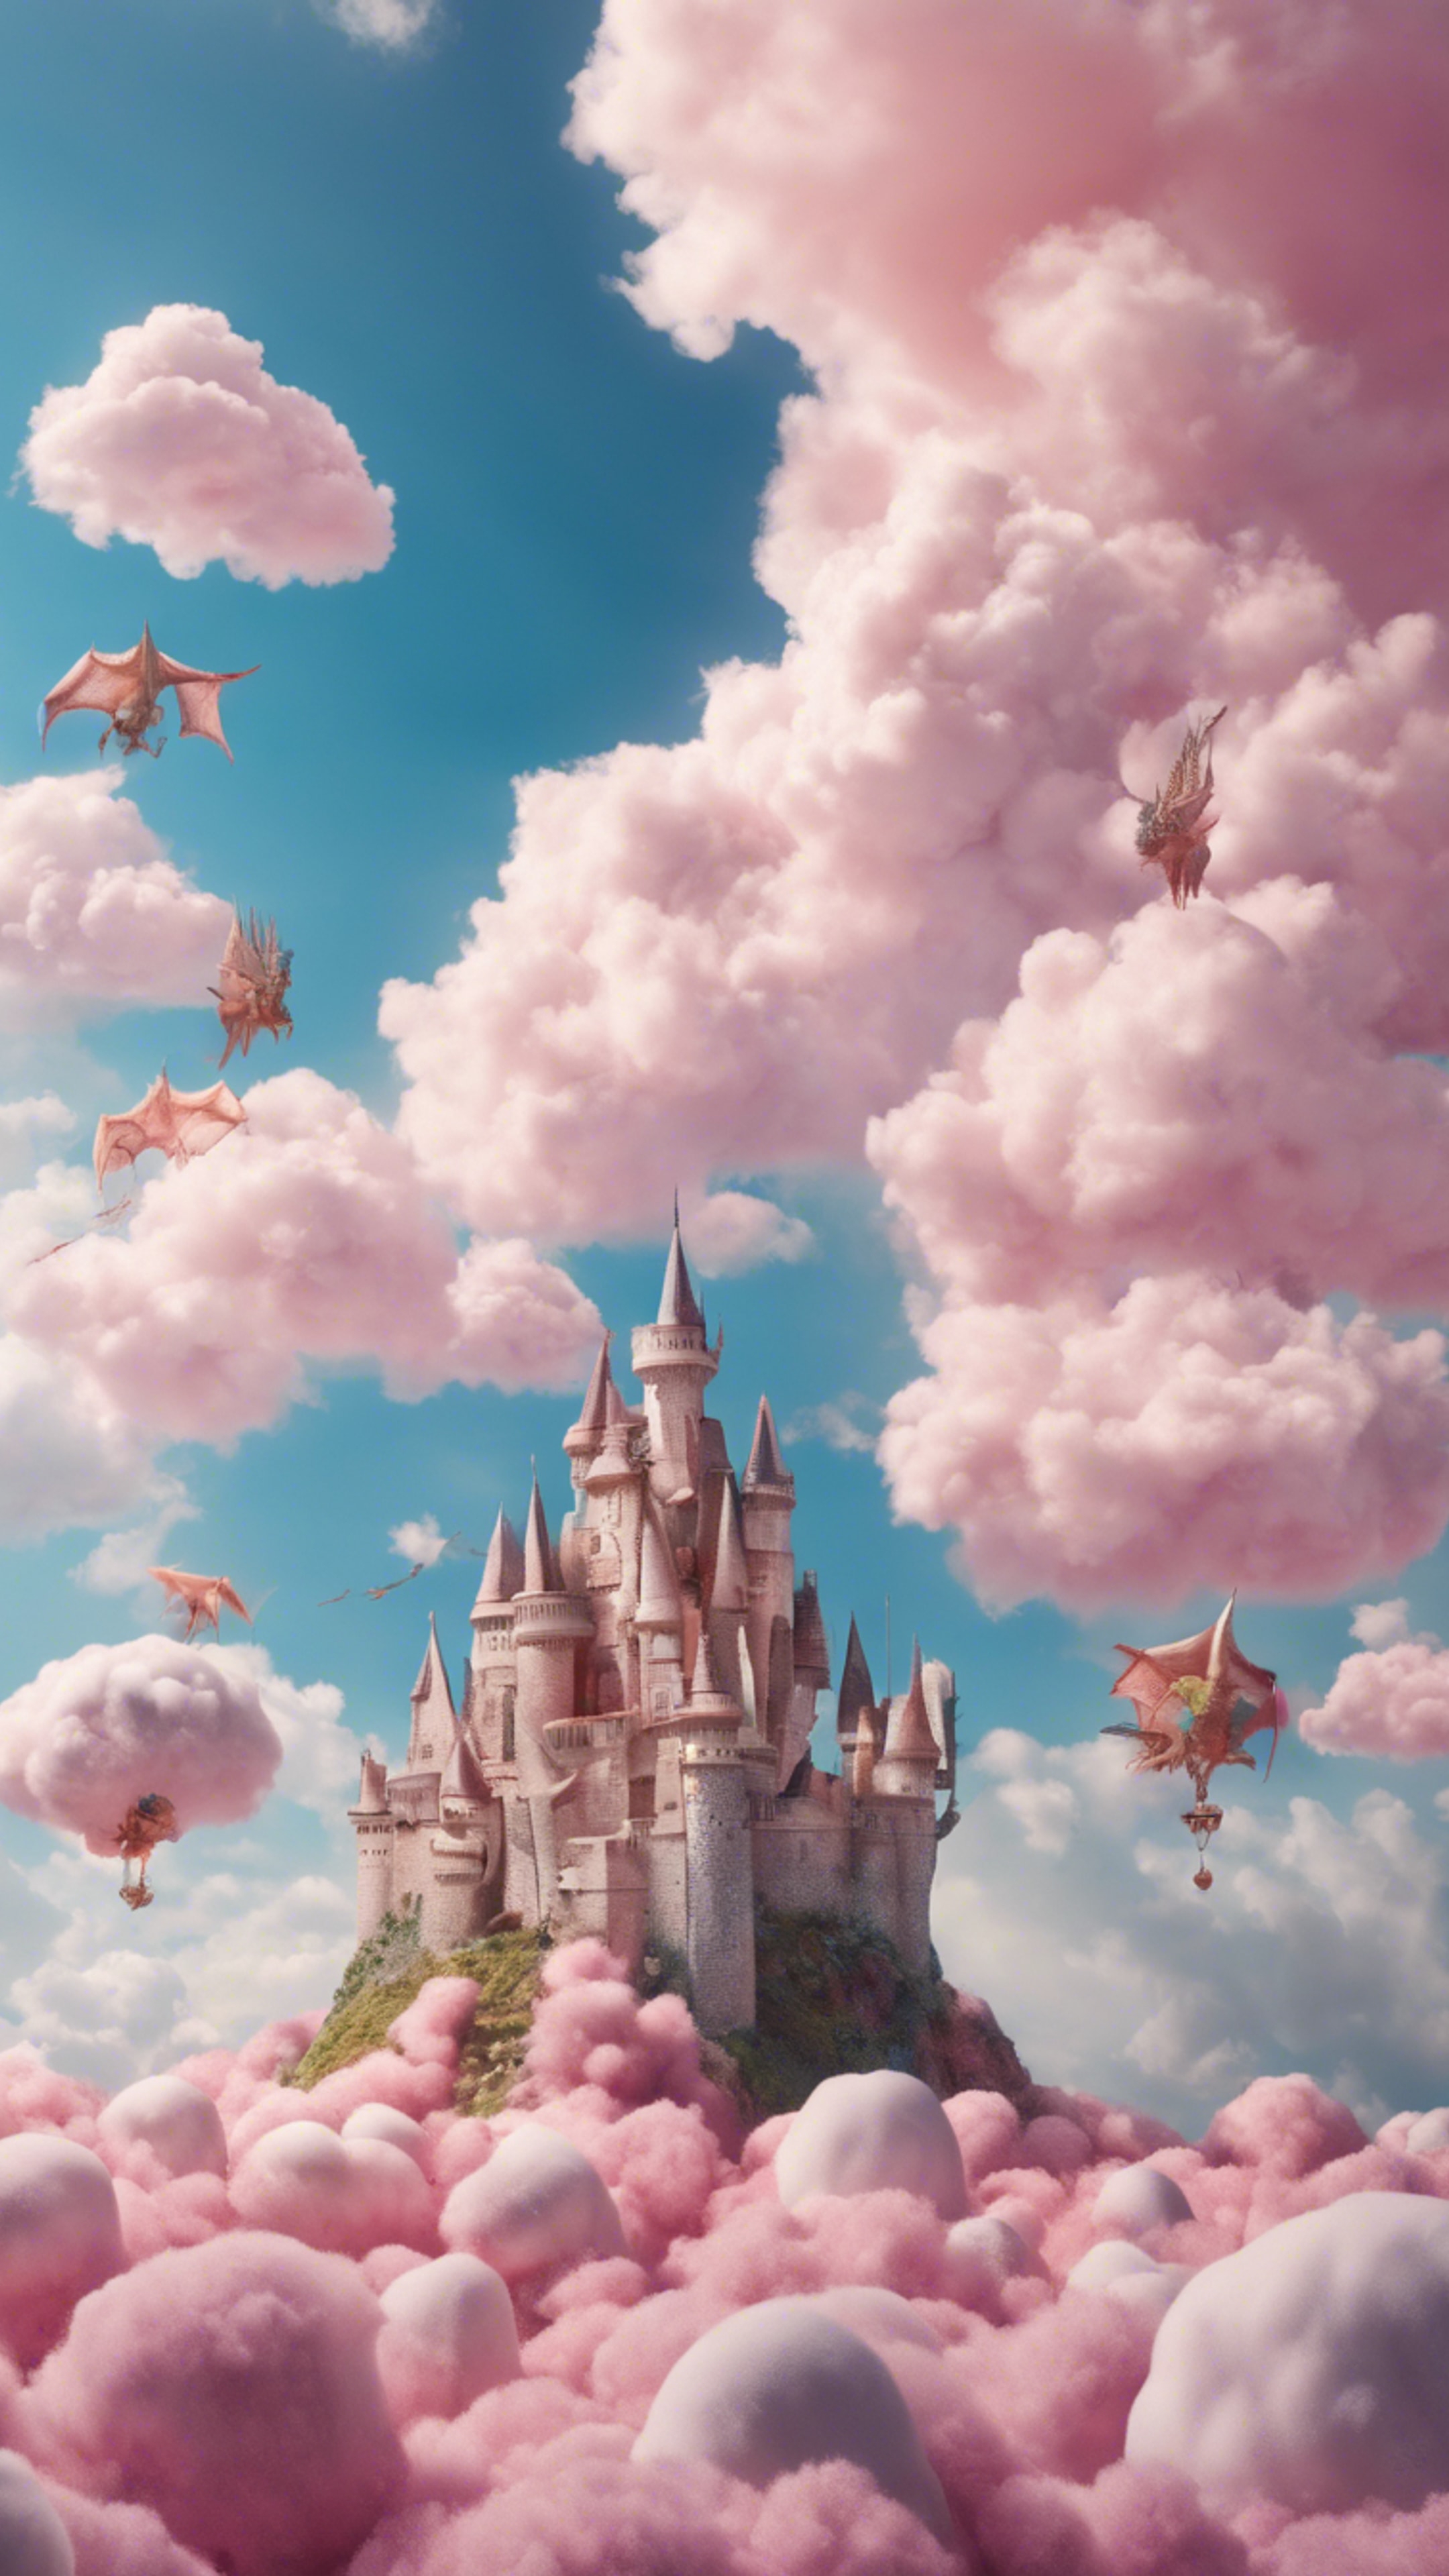 A castle floating in the sky above fluffy, cotton-candy-like clouds surrounded by a huddle of playful, magical dragons. Tapeta na zeď[be63bba74c3941c98c10]